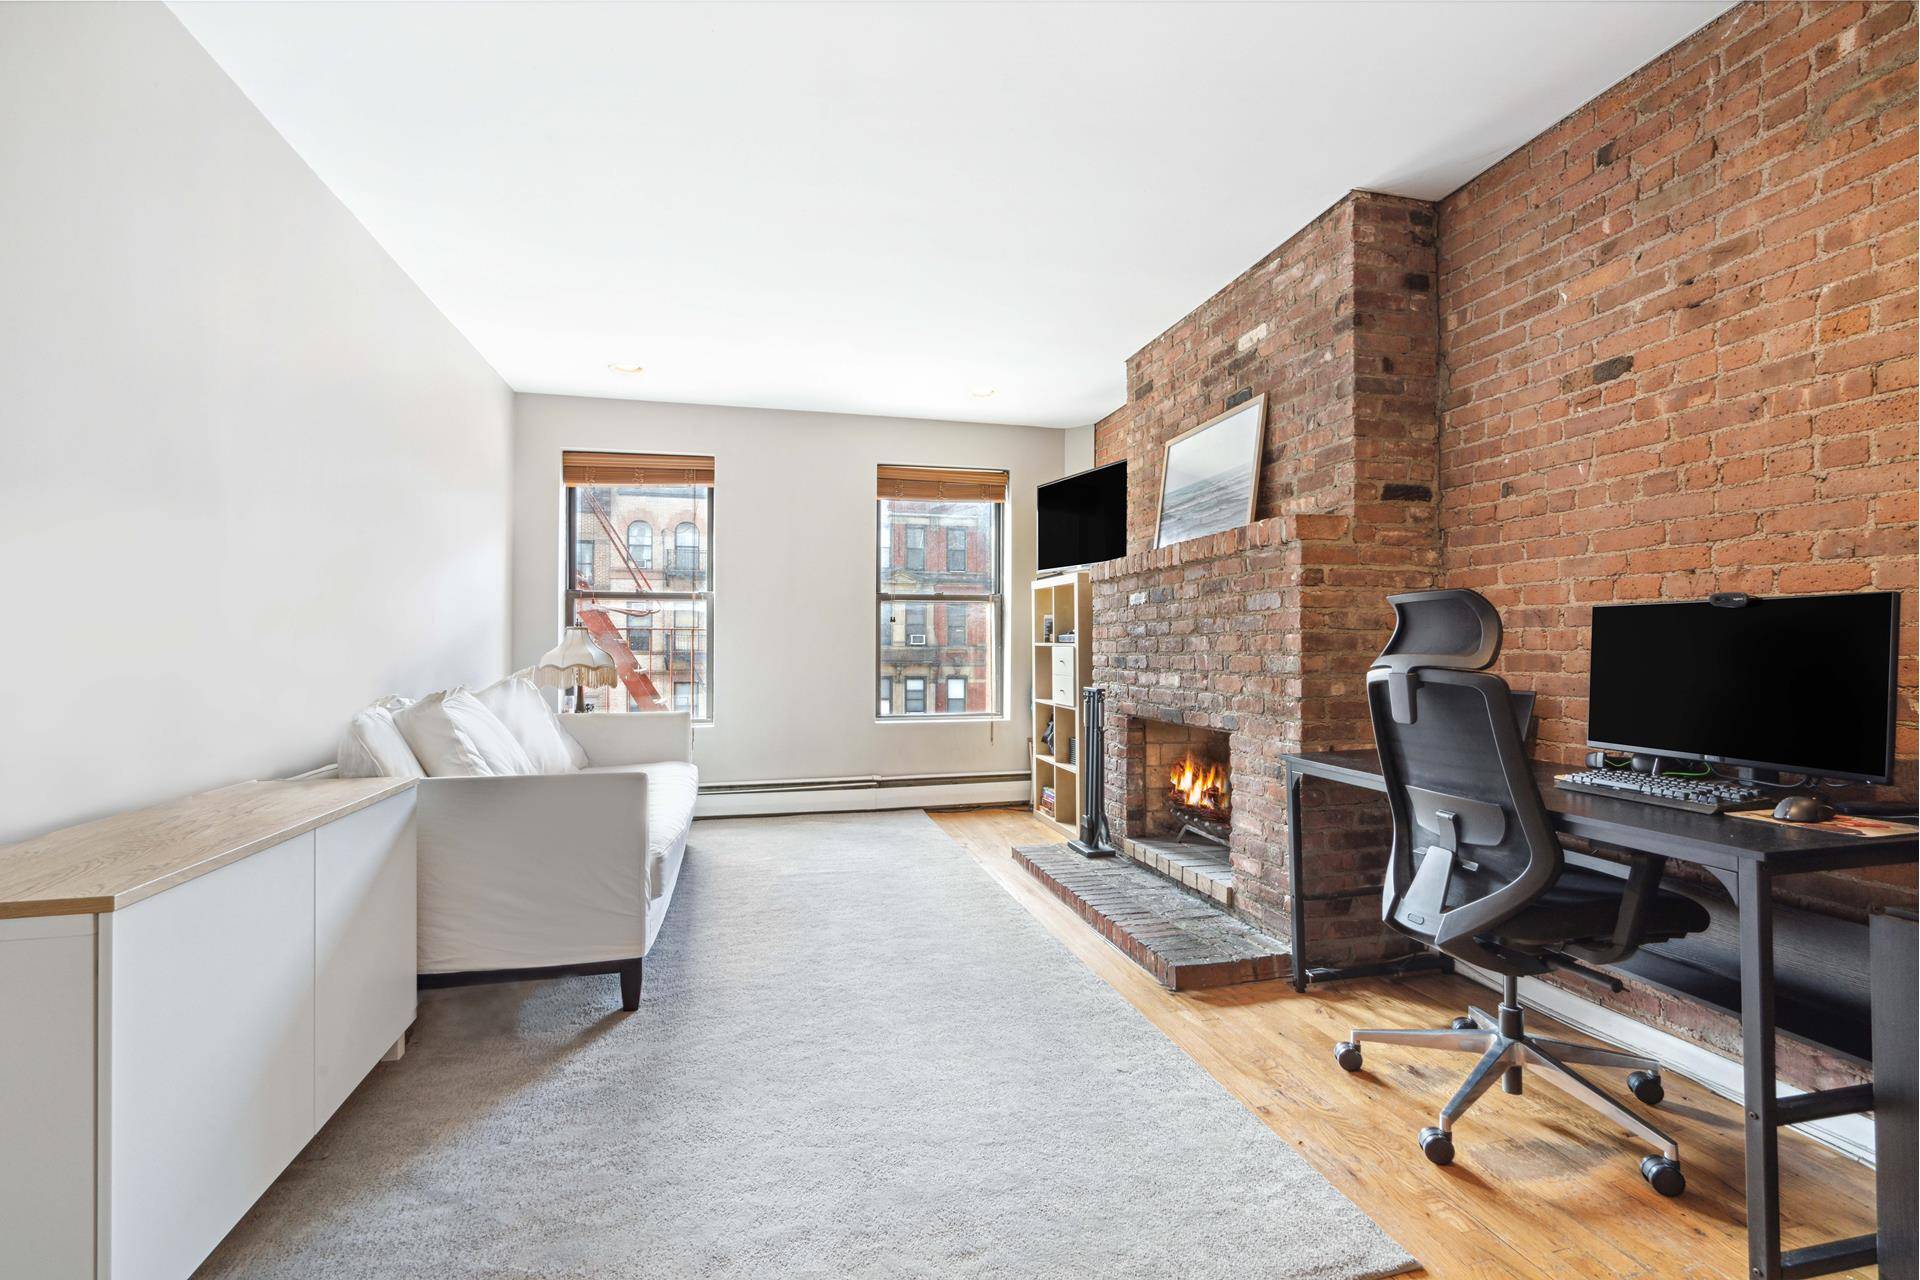 Spectacular Hell's Kitchen one bedroom with a sought after floor plan offering separation of space, placing the living room and bedroom at opposite ends of the home for optimal privacy.